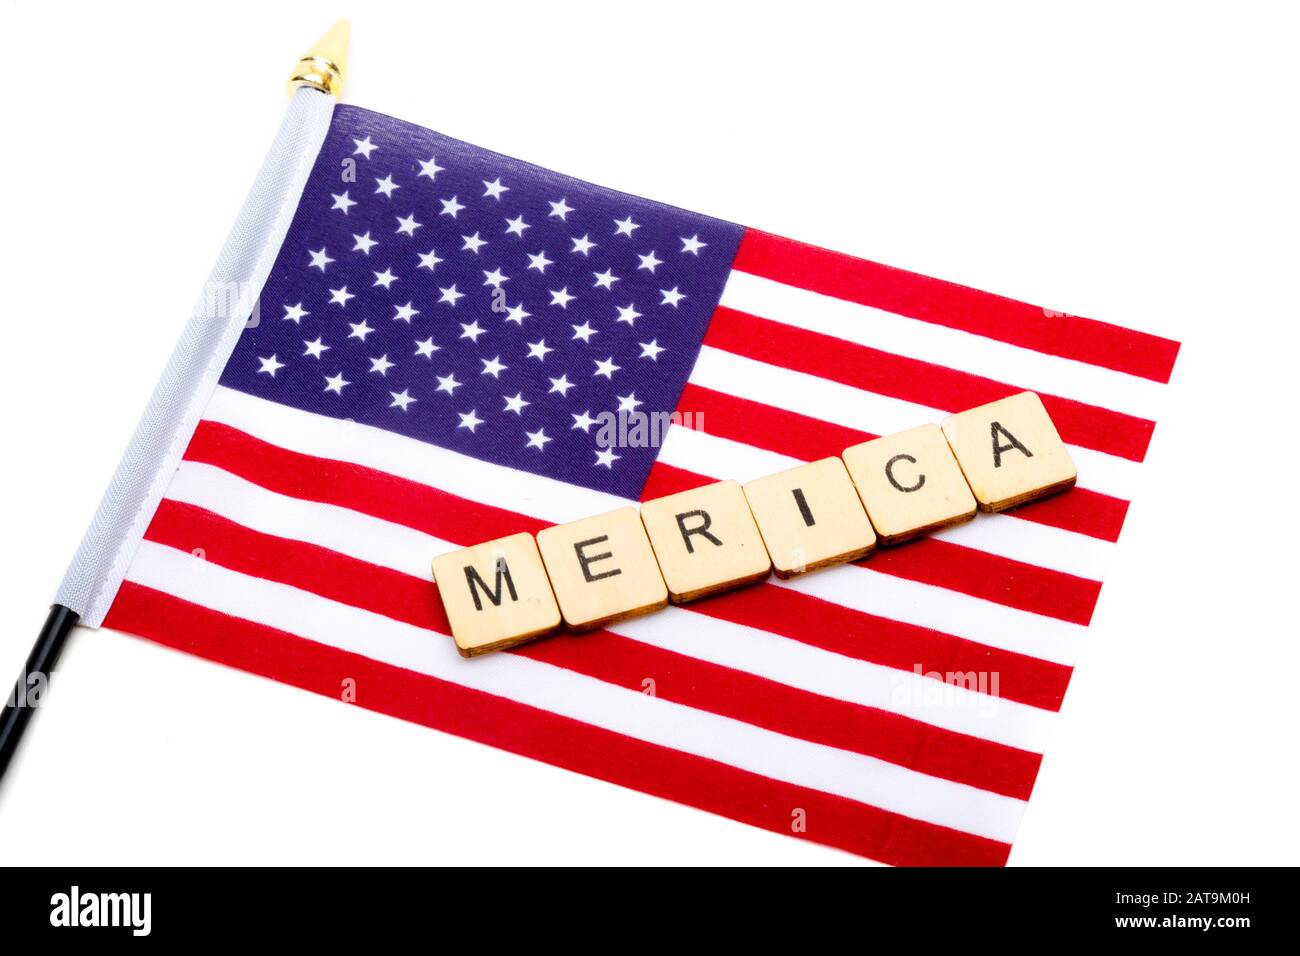 The flag of the United States isolated on a white background with a sign reading Merica Stock Photo